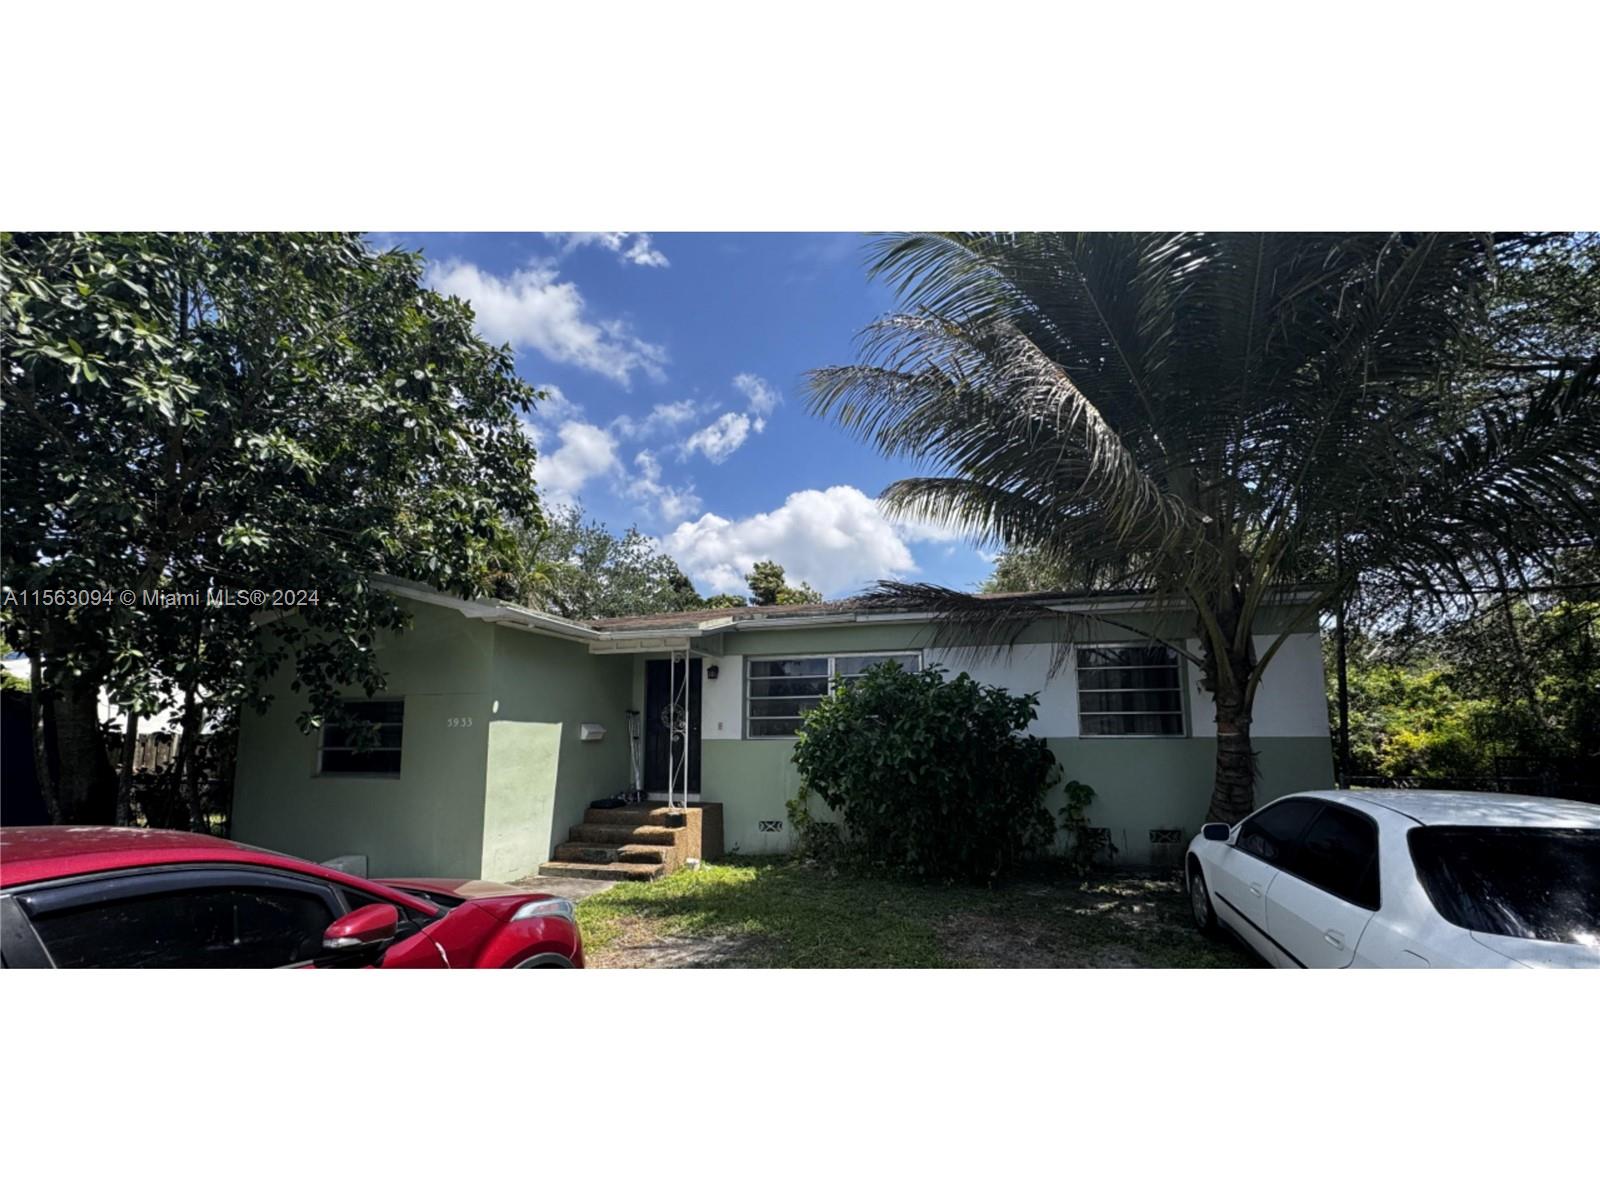 Discover a rare investment gem at 5933 SW 61st Ave in South Miami, FL. This presents a prime opportunity for investors looking to capitalize on the thriving South Miami real estate market. While the property requires full repairs, it comes with a clean lien and title report, ensuring a hassle-free transaction. Nestled in a highly desirable area with limited inventory, this fixer-upper promises significant potential returns. Don't miss out on your chance to secure this lucrative investment opportunity in an unbeatable location.